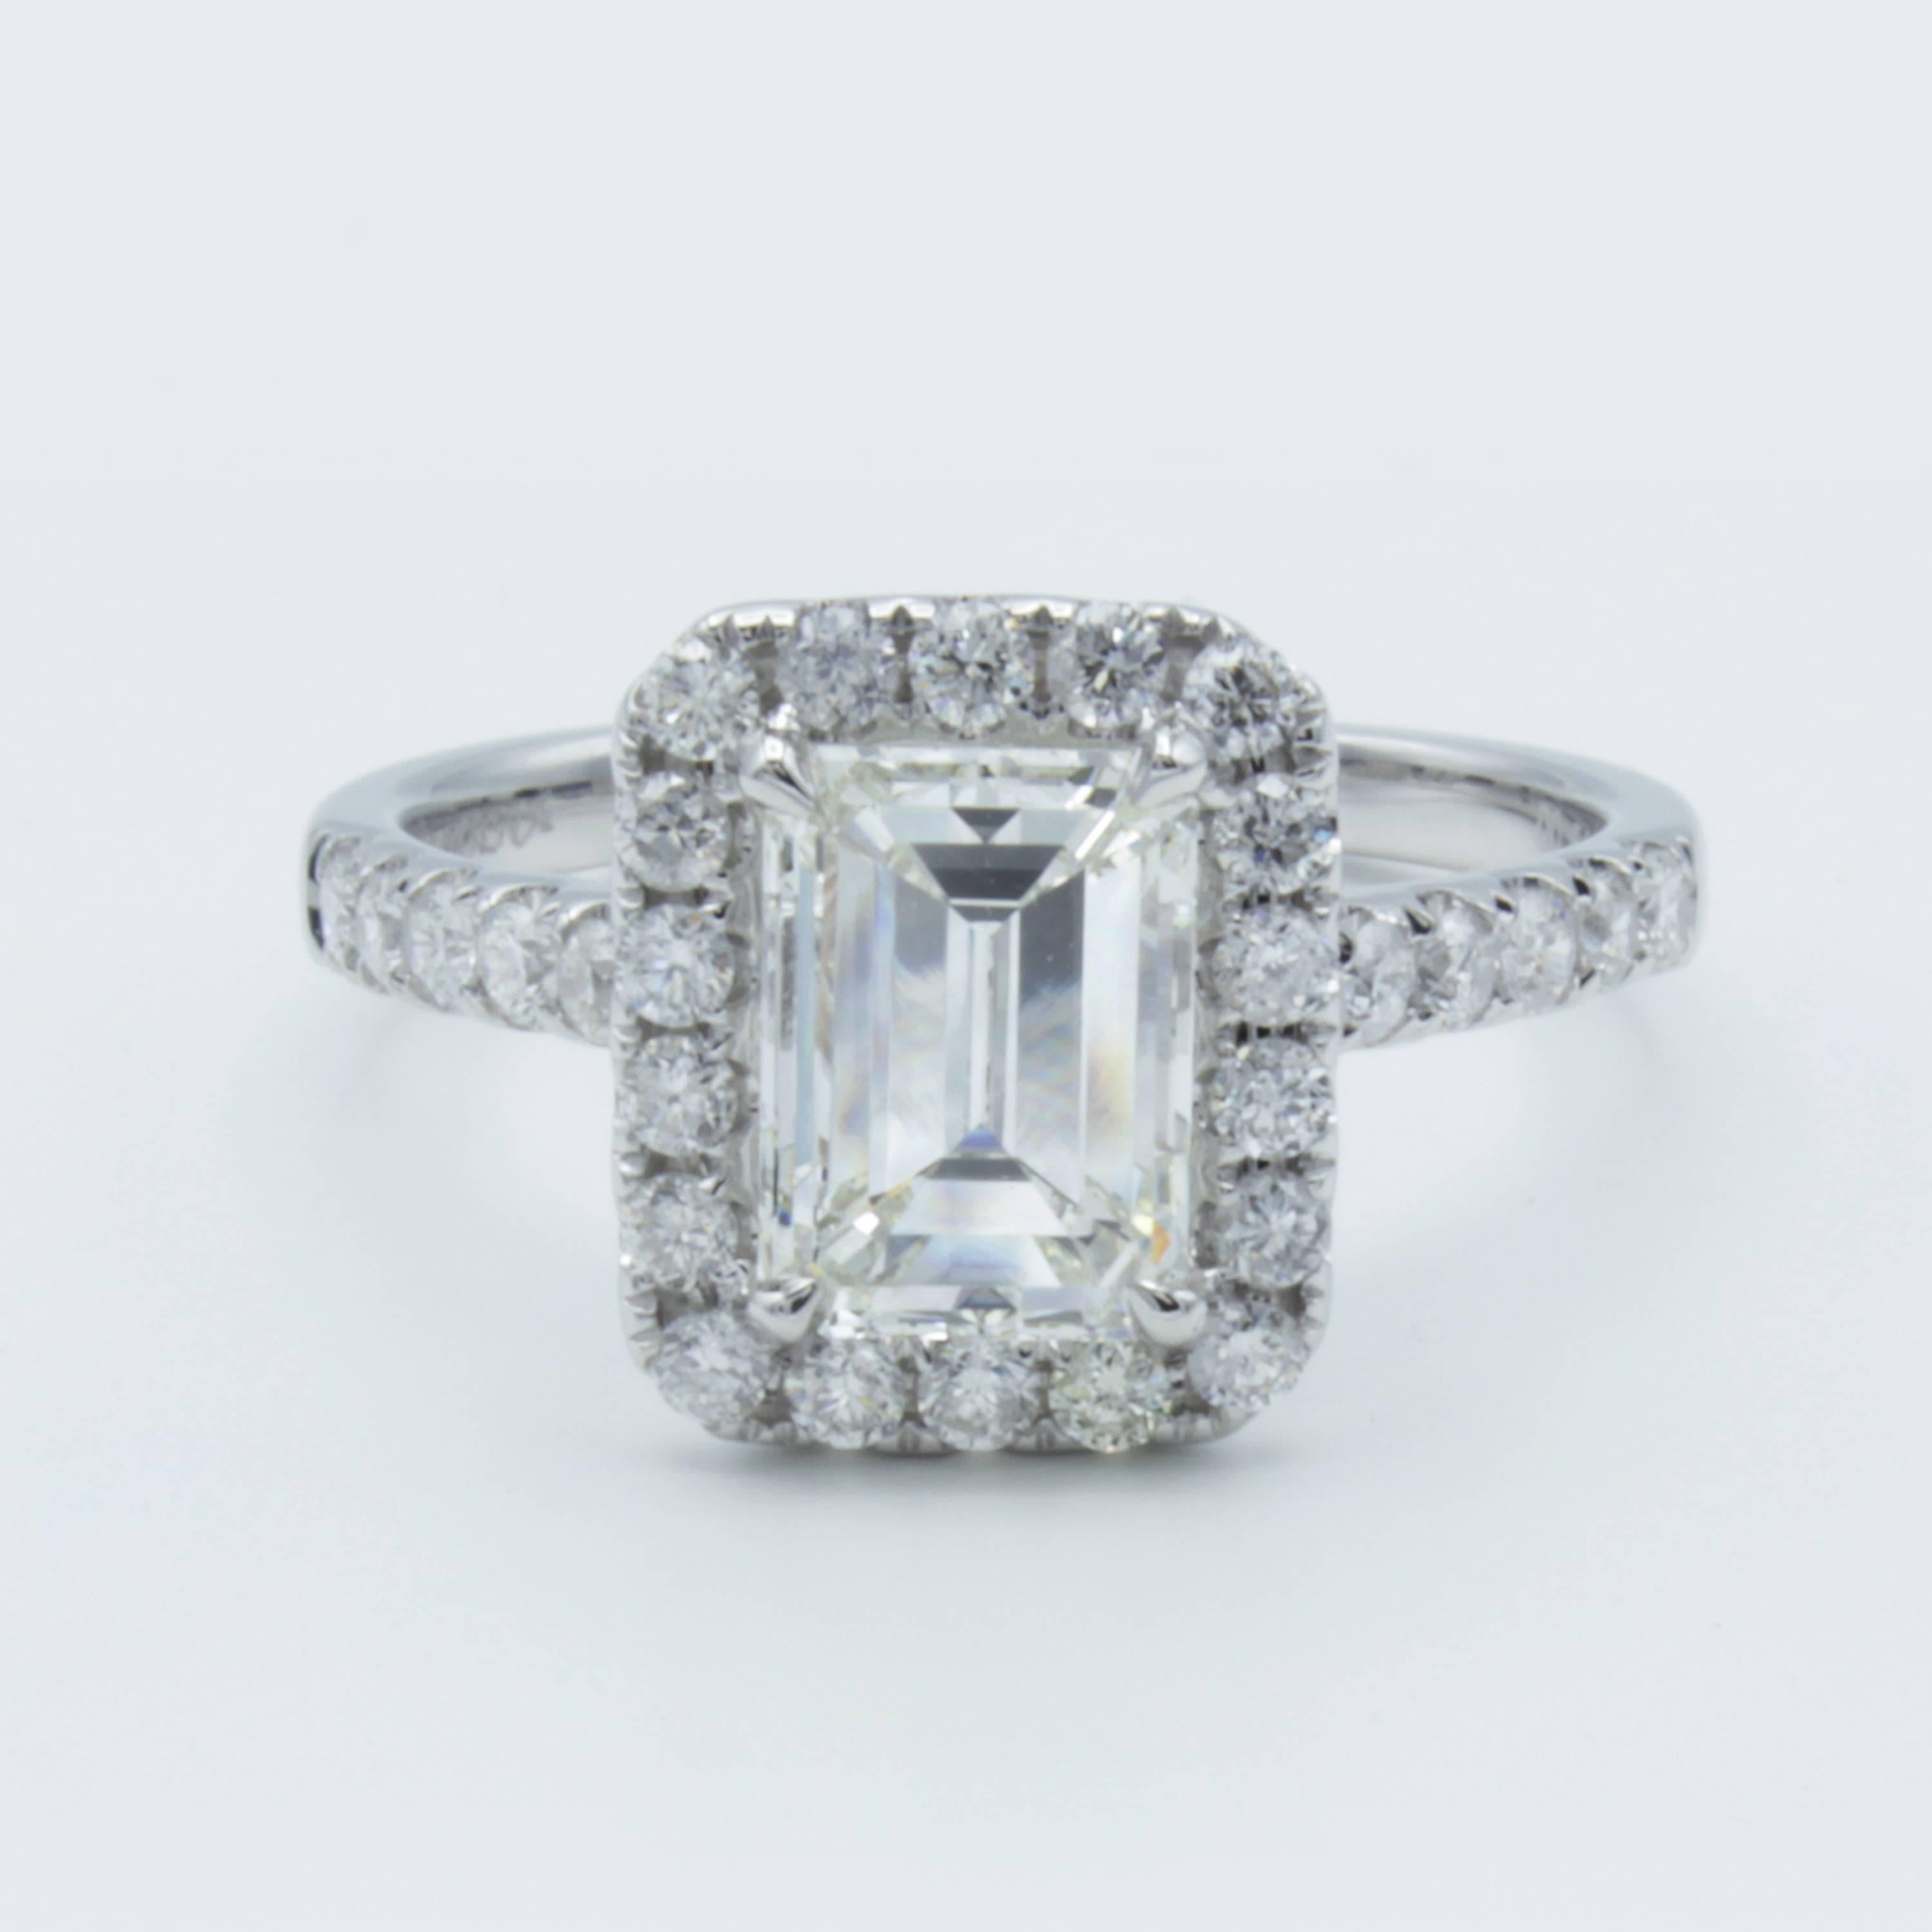 Bold in character and beautiful in rarity. This beautiful Rosenberg Diamonds & Co. engagement ring features a stunning GIA certified 1.51 carat emerald cut diamond embraced by round brilliant accents all across the band of 18Kt white gold. Designed